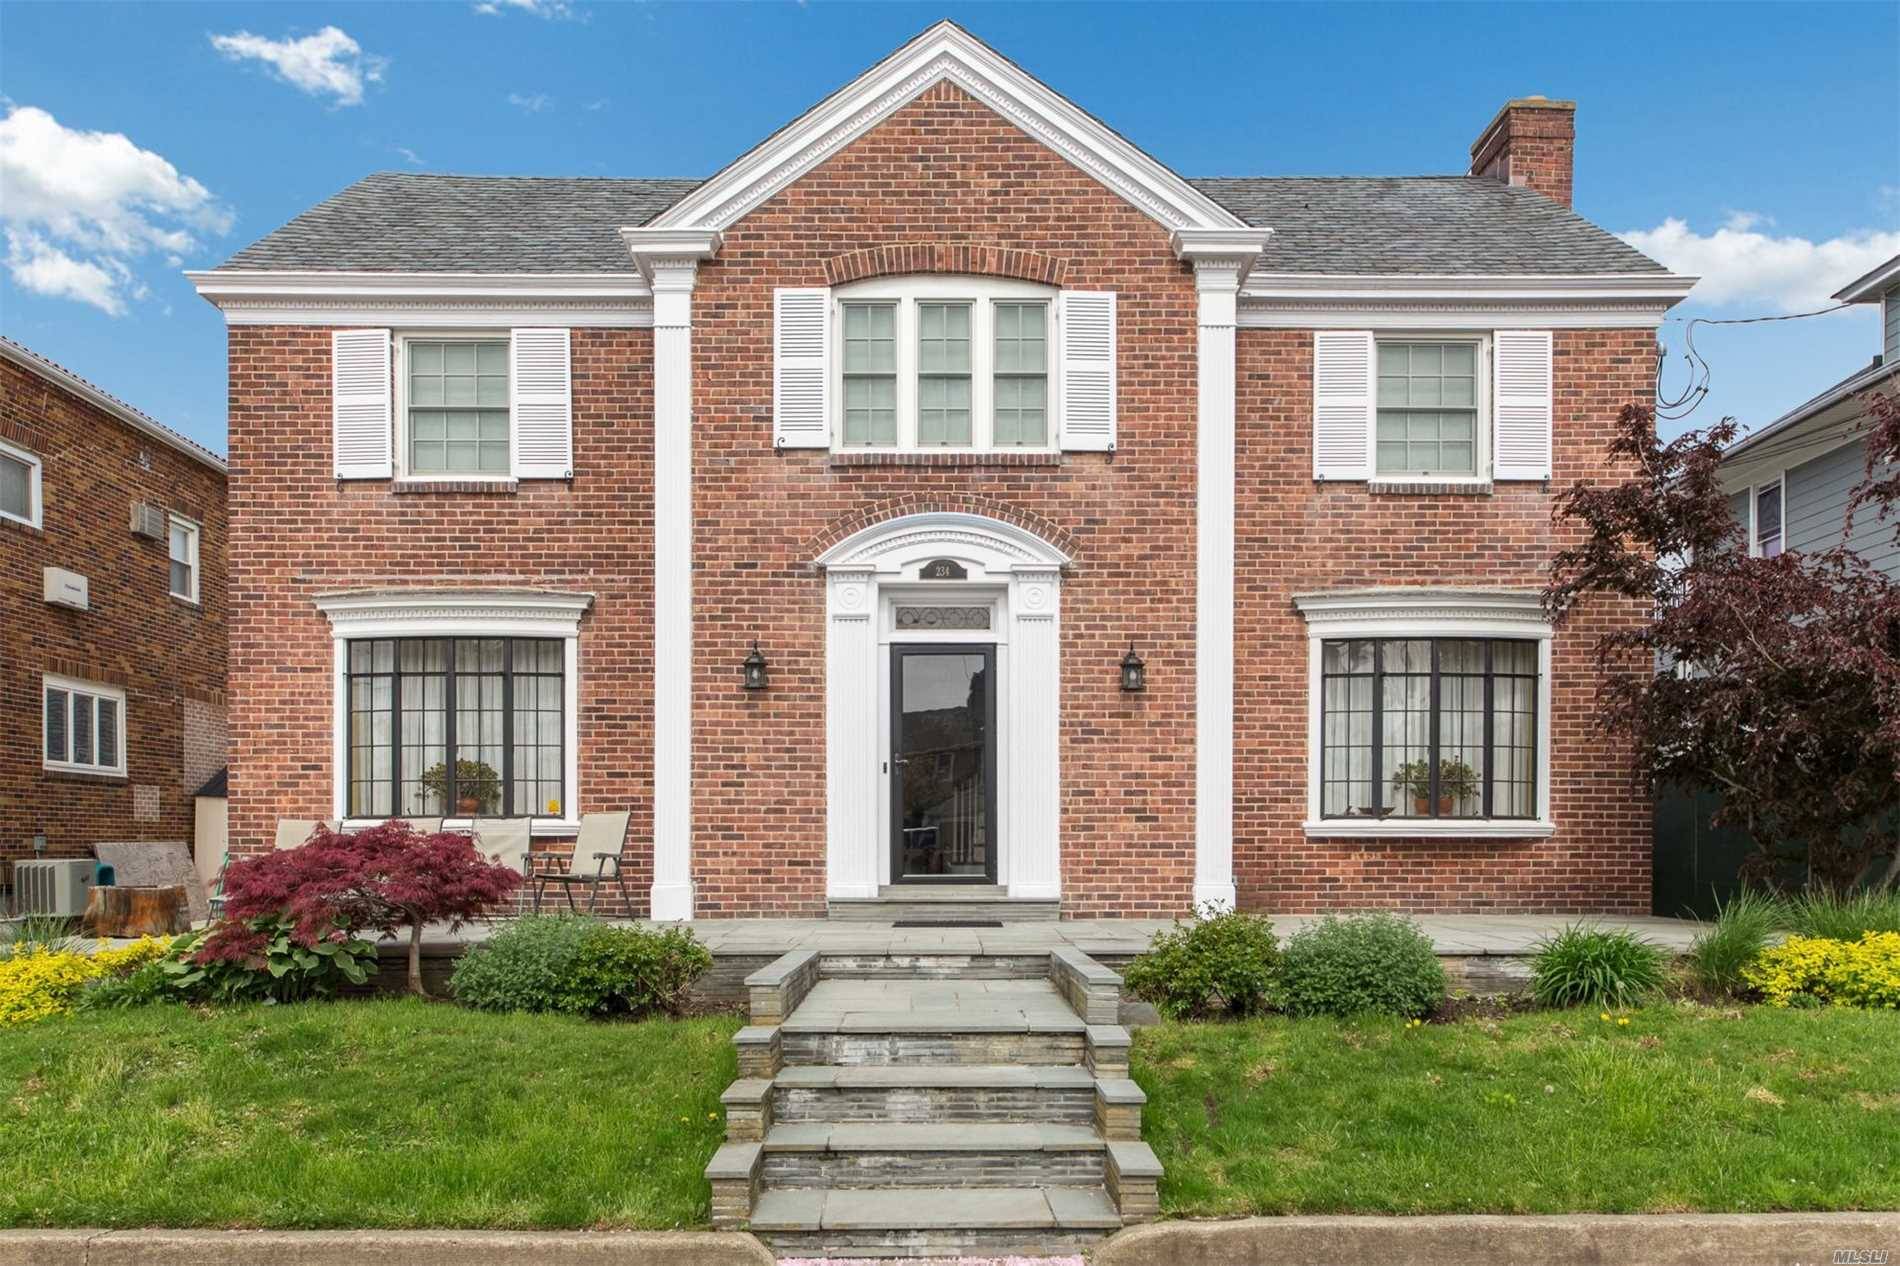 Stately All Brick Center Hall Colonial Home Is Favored By Glorious Sunlight And Positioned On An Expansive 6,000 Sq.